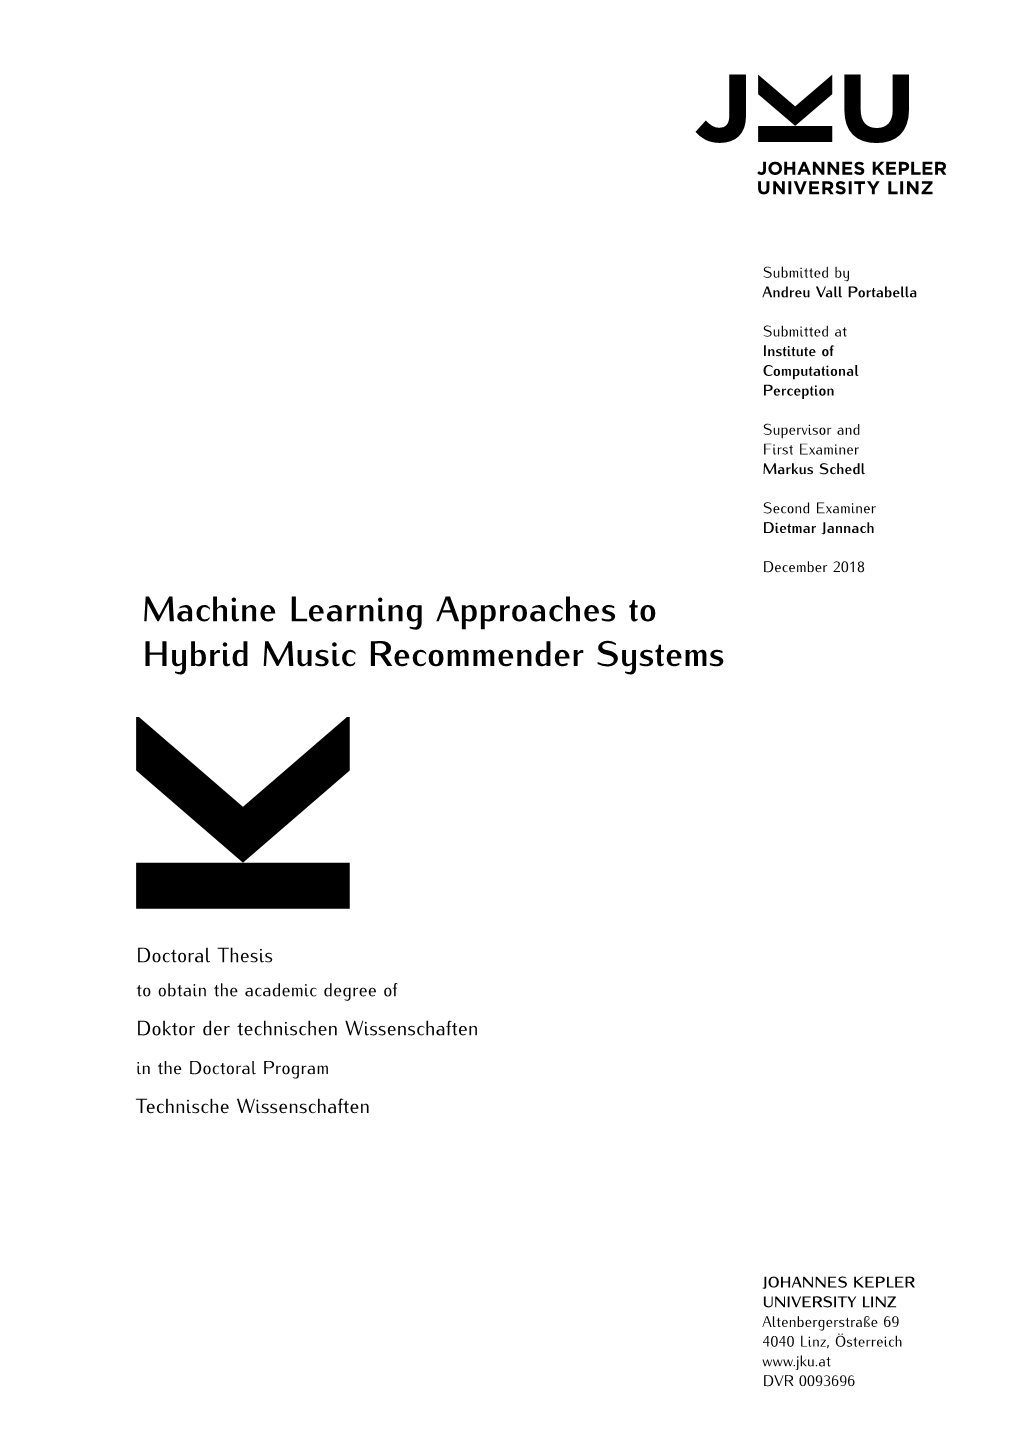 Machine Learning Approaches to Hybrid Music Recommender Systems